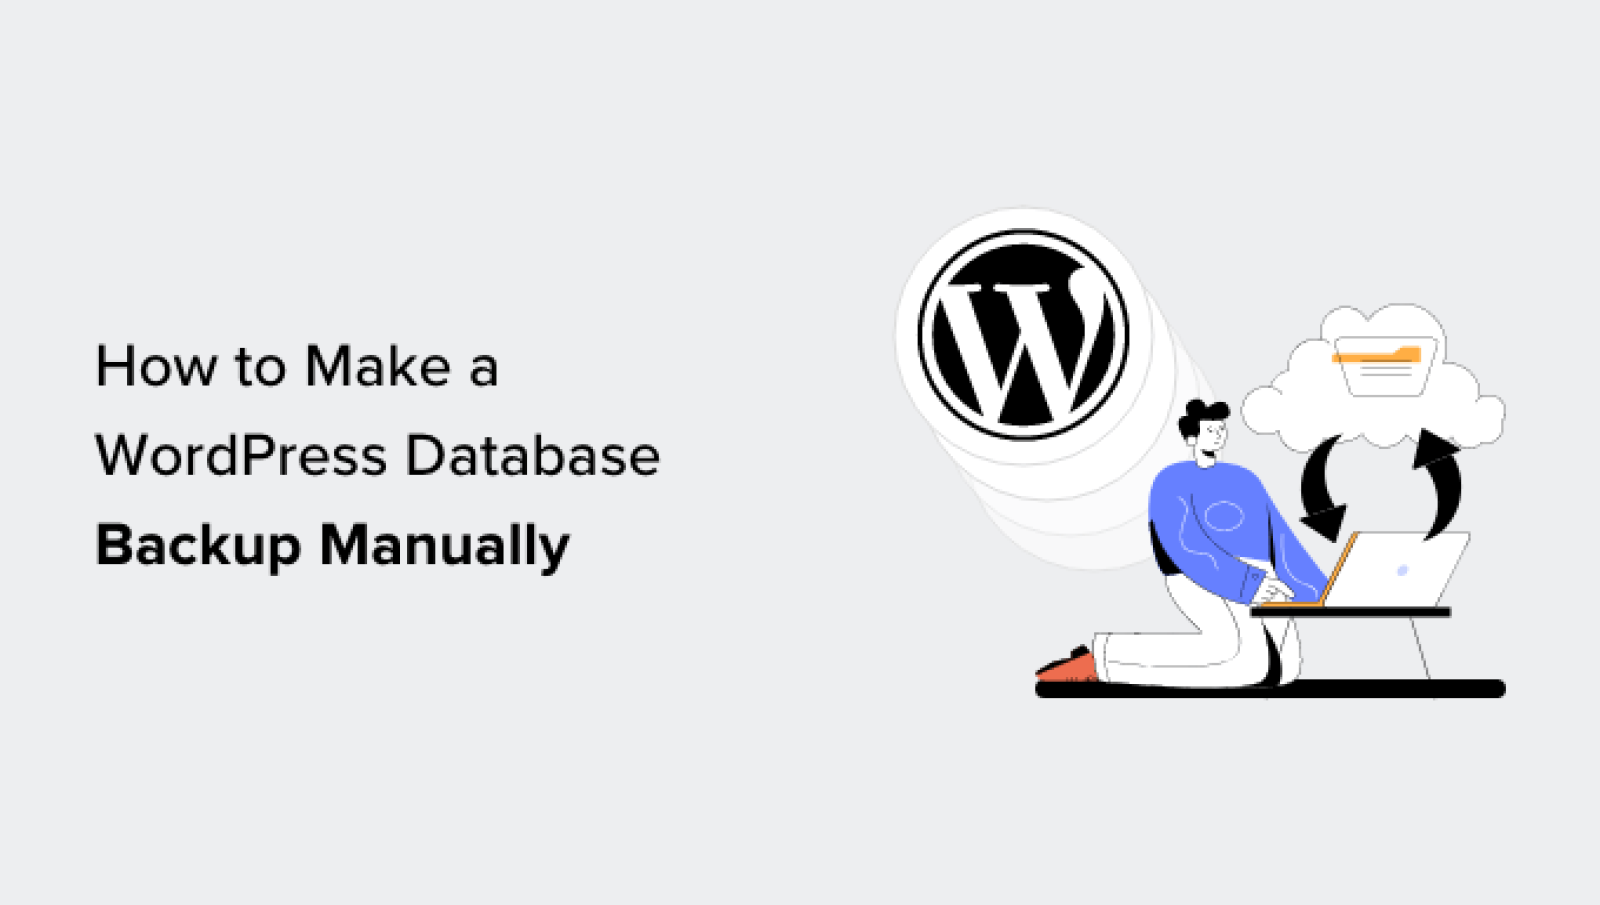 How one can Make a WordPress Database Backup Manually (Step by Step)